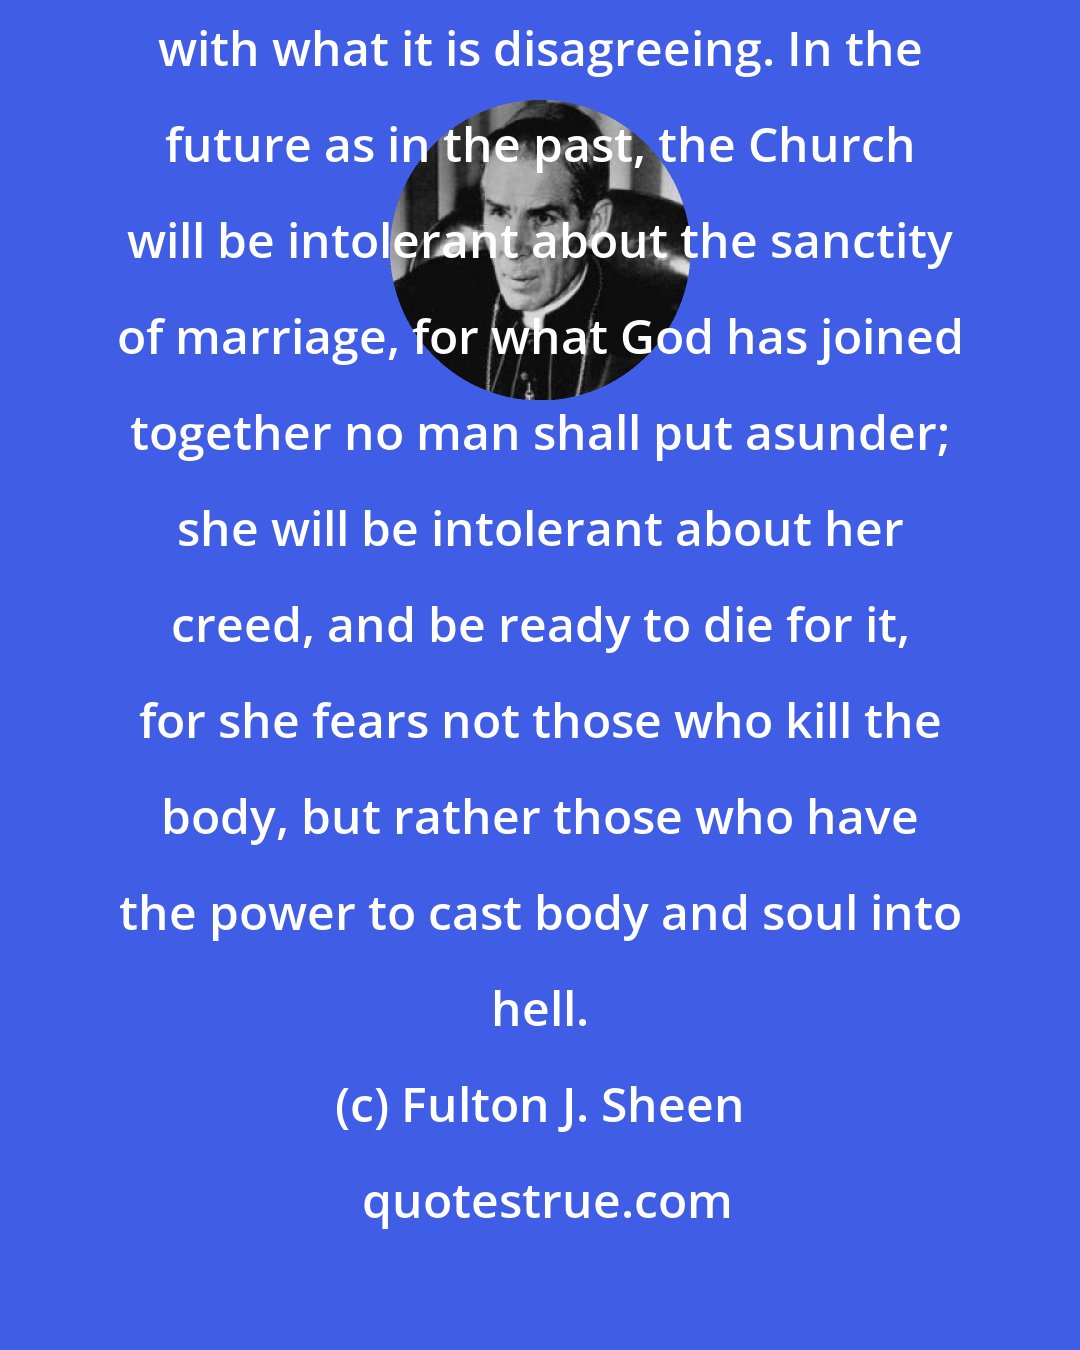 Fulton J. Sheen: The world may disagree with the Church, but the world knows very definitely with what it is disagreeing. In the future as in the past, the Church will be intolerant about the sanctity of marriage, for what God has joined together no man shall put asunder; she will be intolerant about her creed, and be ready to die for it, for she fears not those who kill the body, but rather those who have the power to cast body and soul into hell.